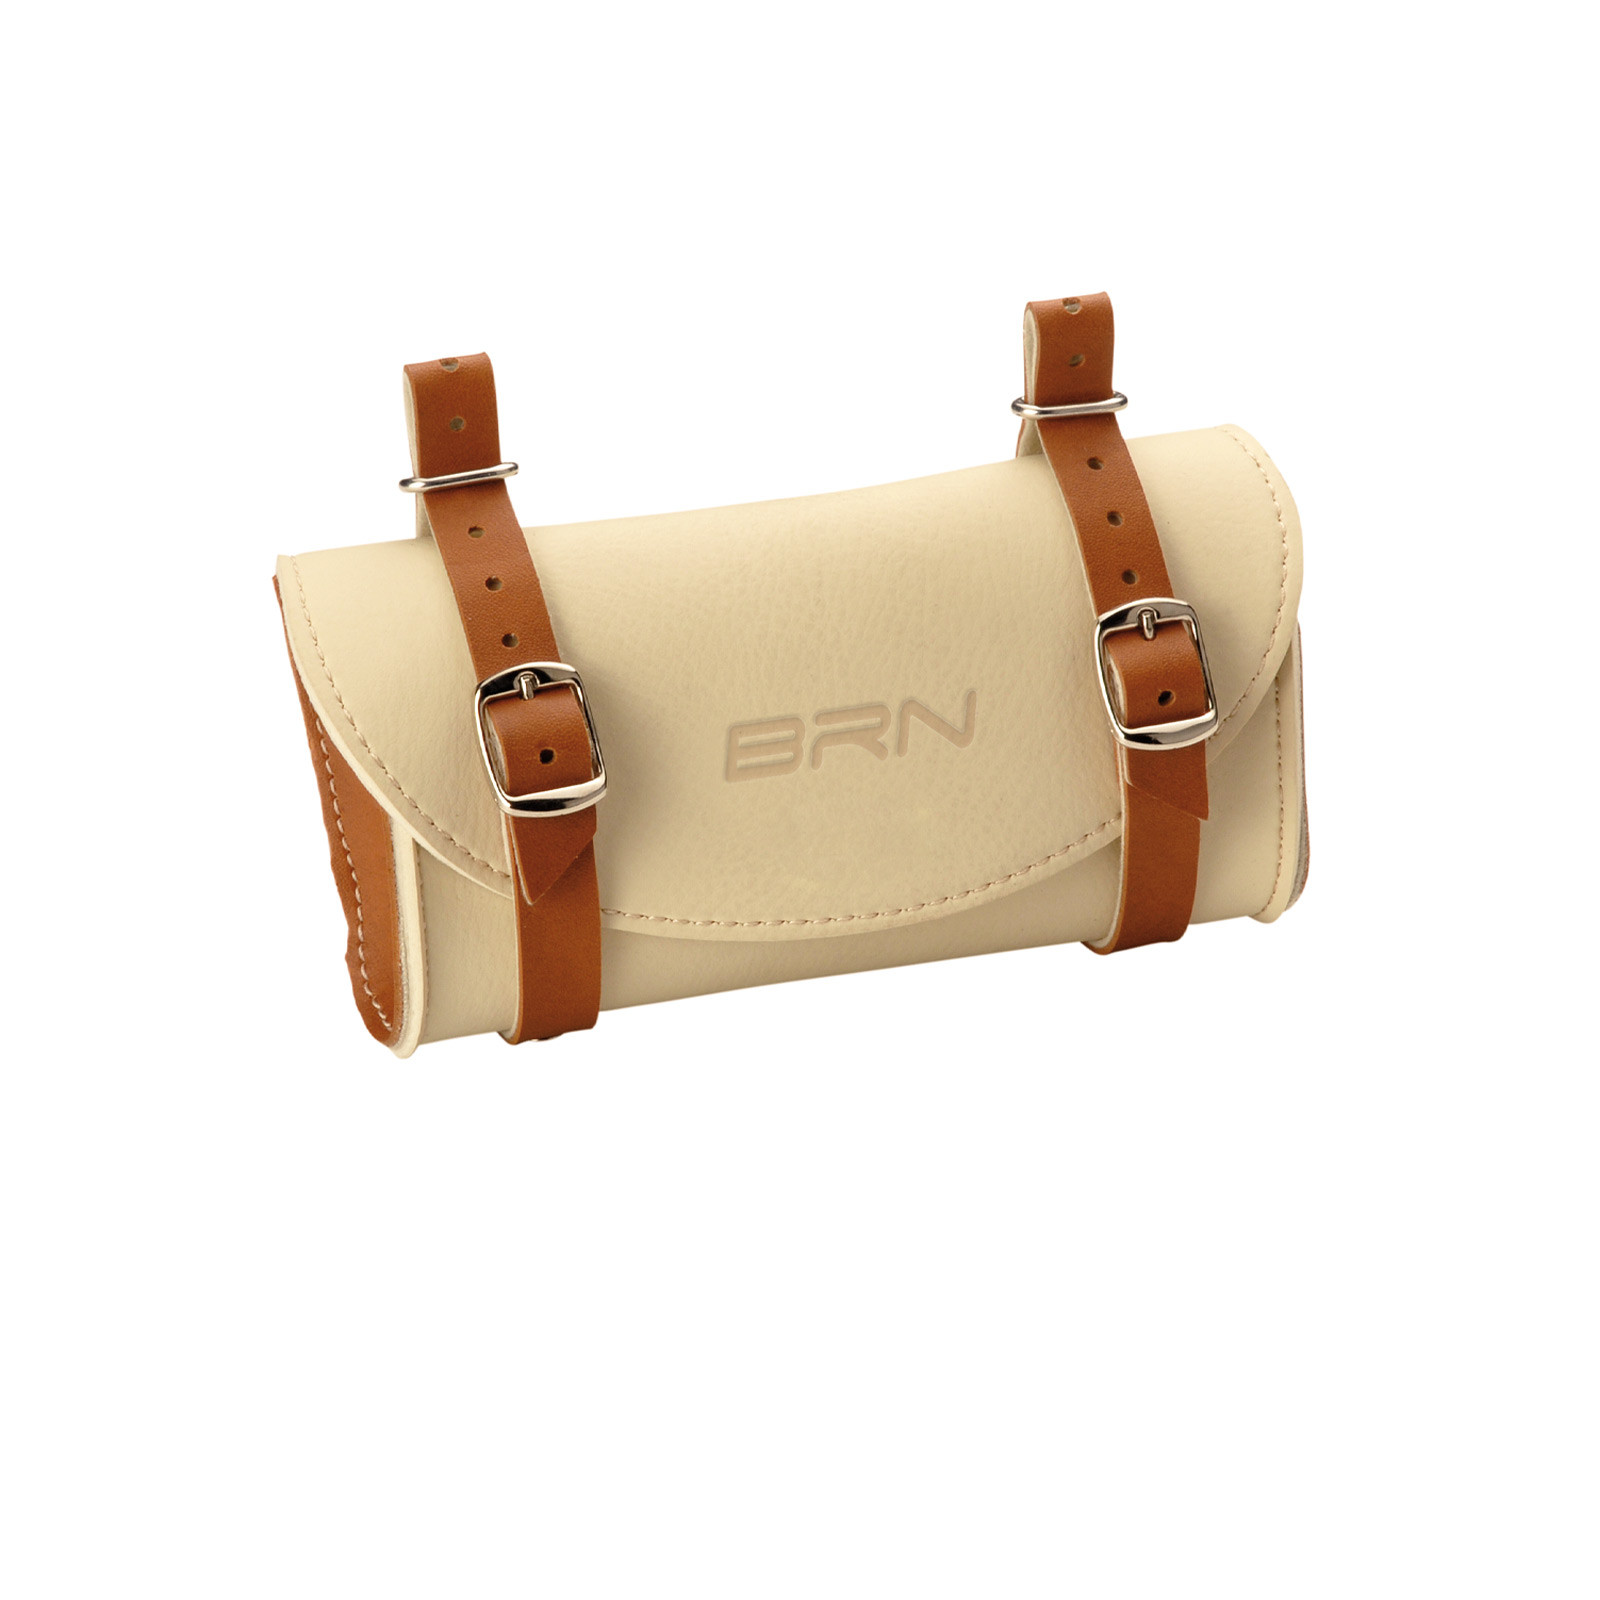 bicycle saddle purse in Leatherette HONEY BROWN - CREAM (IVORY WHITE)